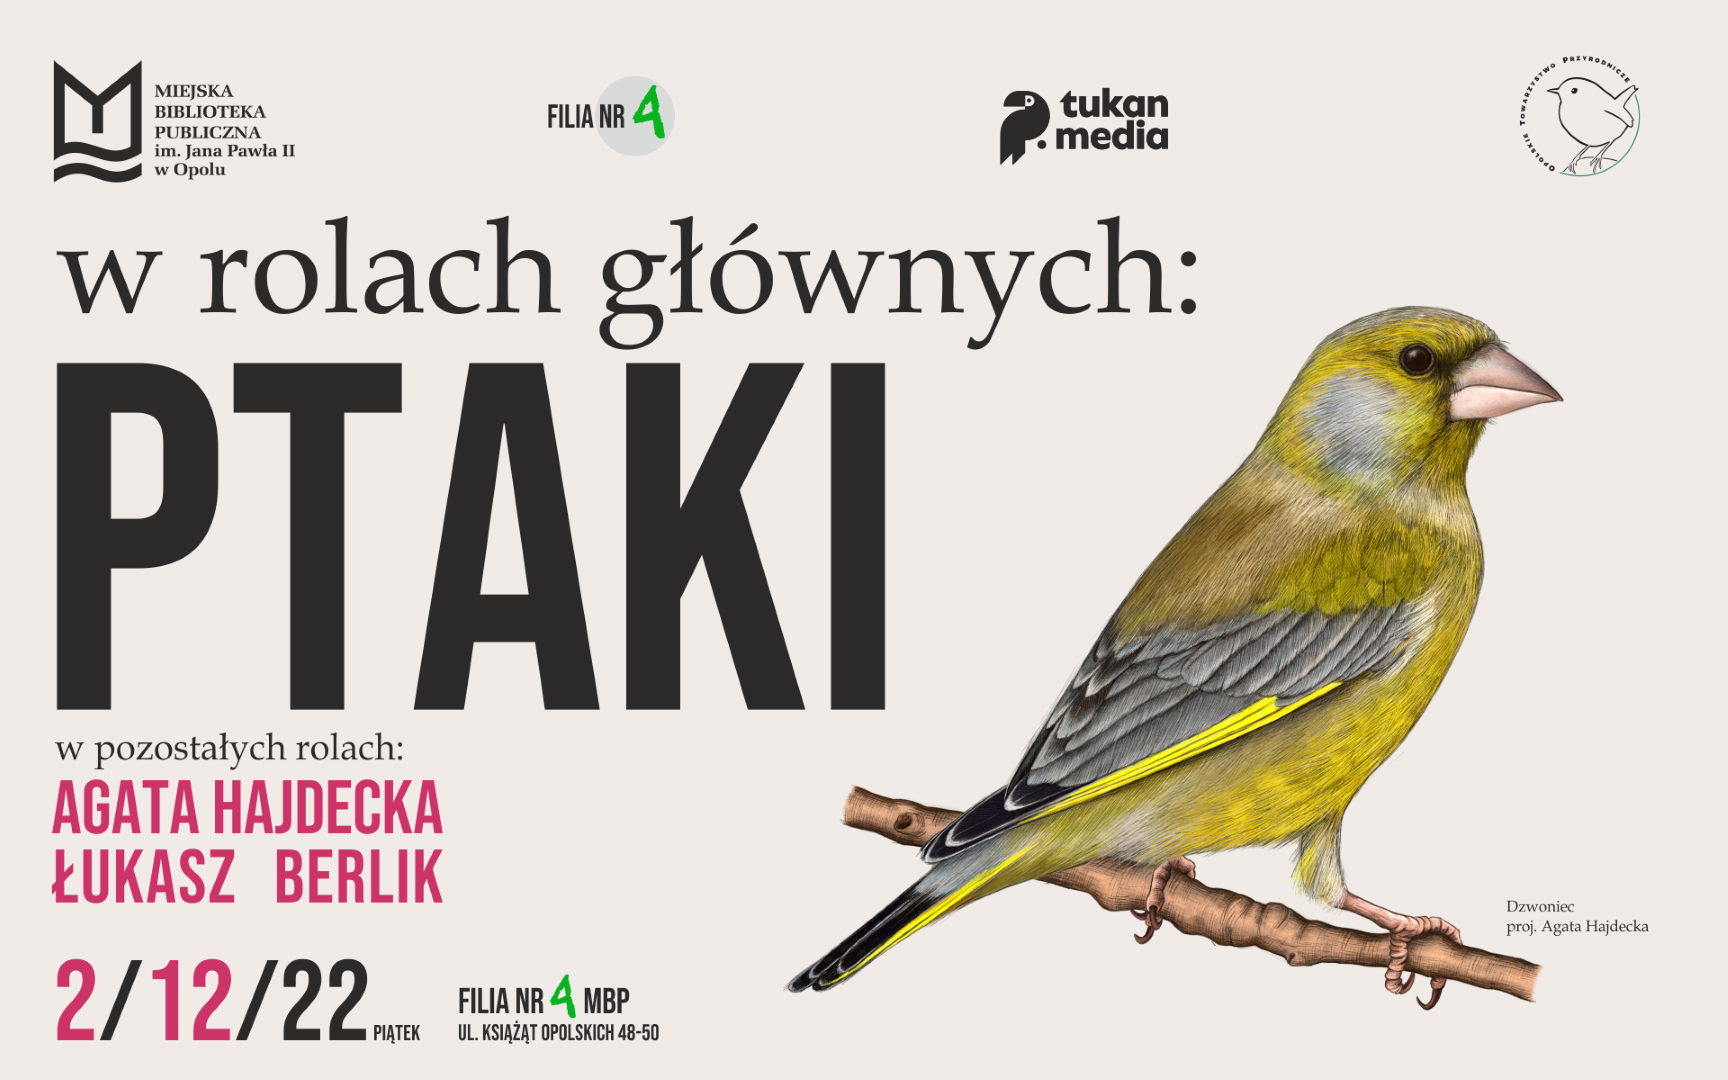 Read more about the article W rolach głównych: PTAKI